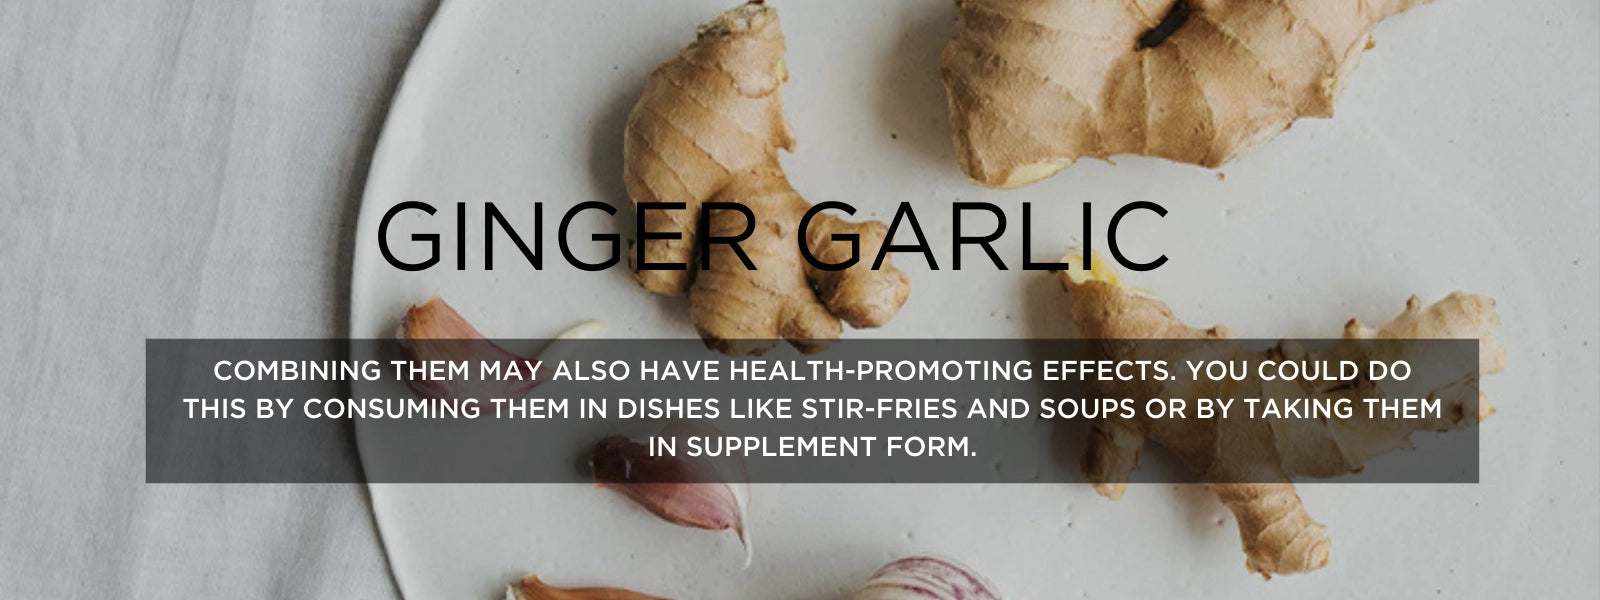 Ginger garlic - Health Benefits, Uses and Important Facts